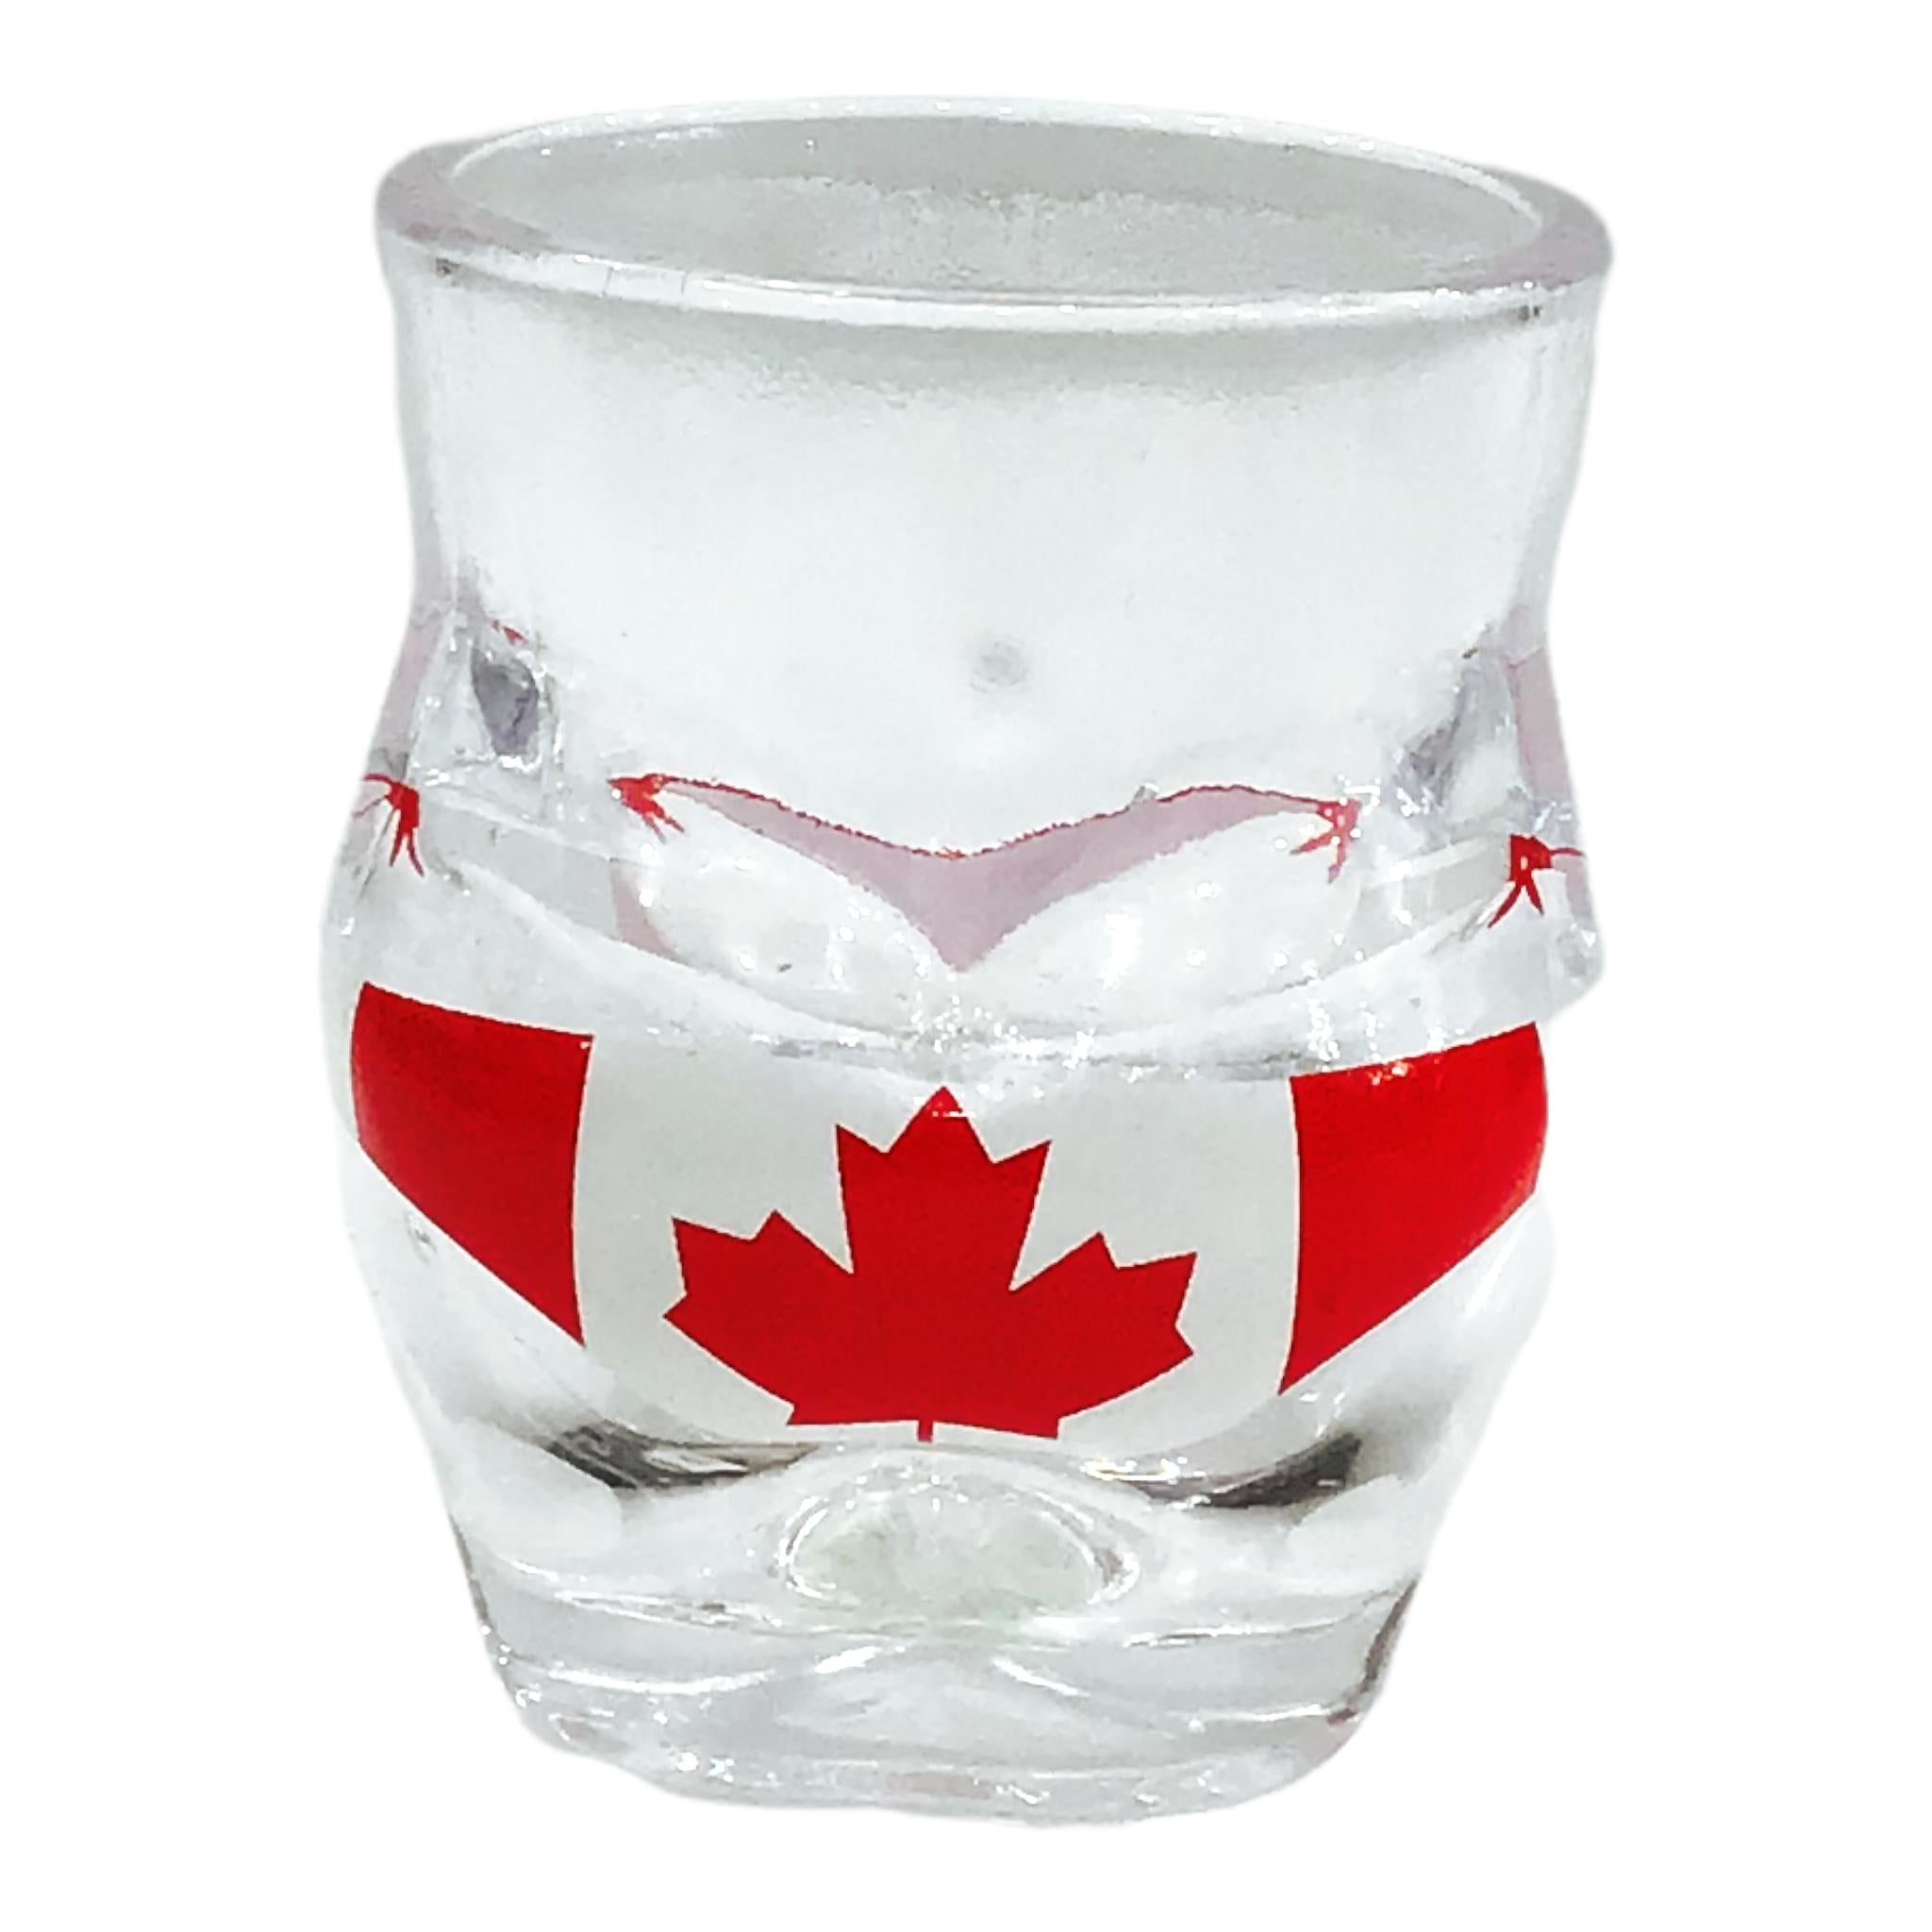 Canada Flag Bikini Shot Glass - Whiskey Shooter Glass for Home, Office, Camping, Travelling Souvenir Gift - Best Quality